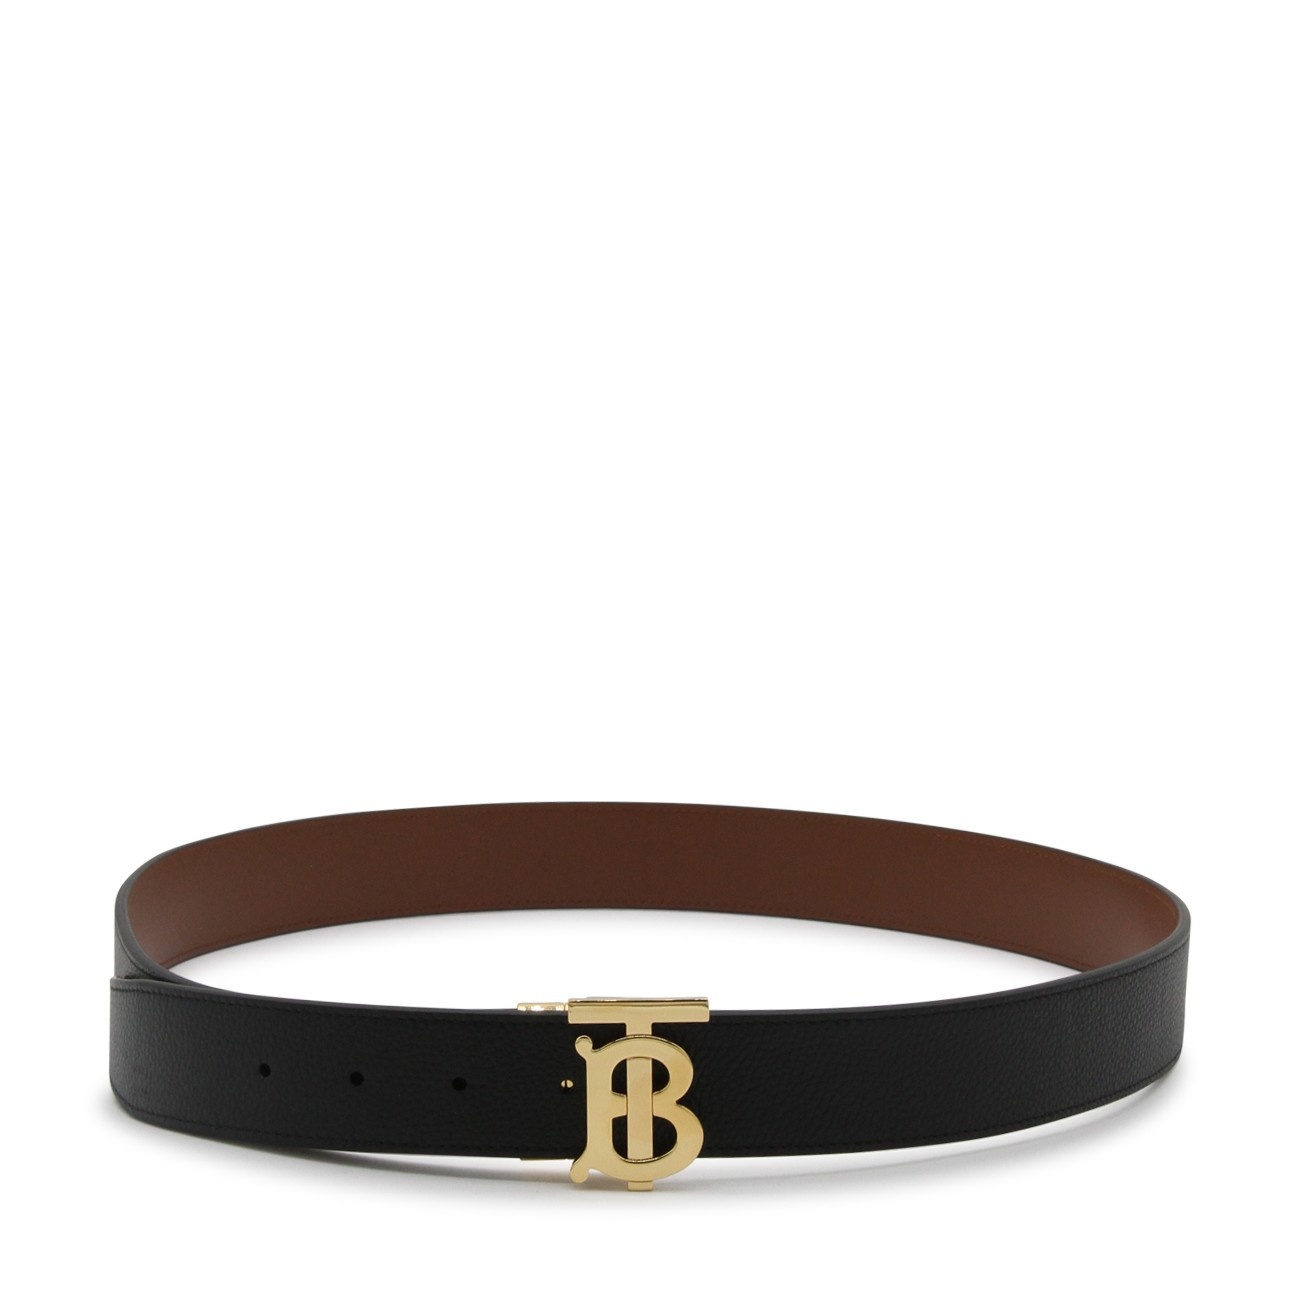 black and tan leather belt - 1